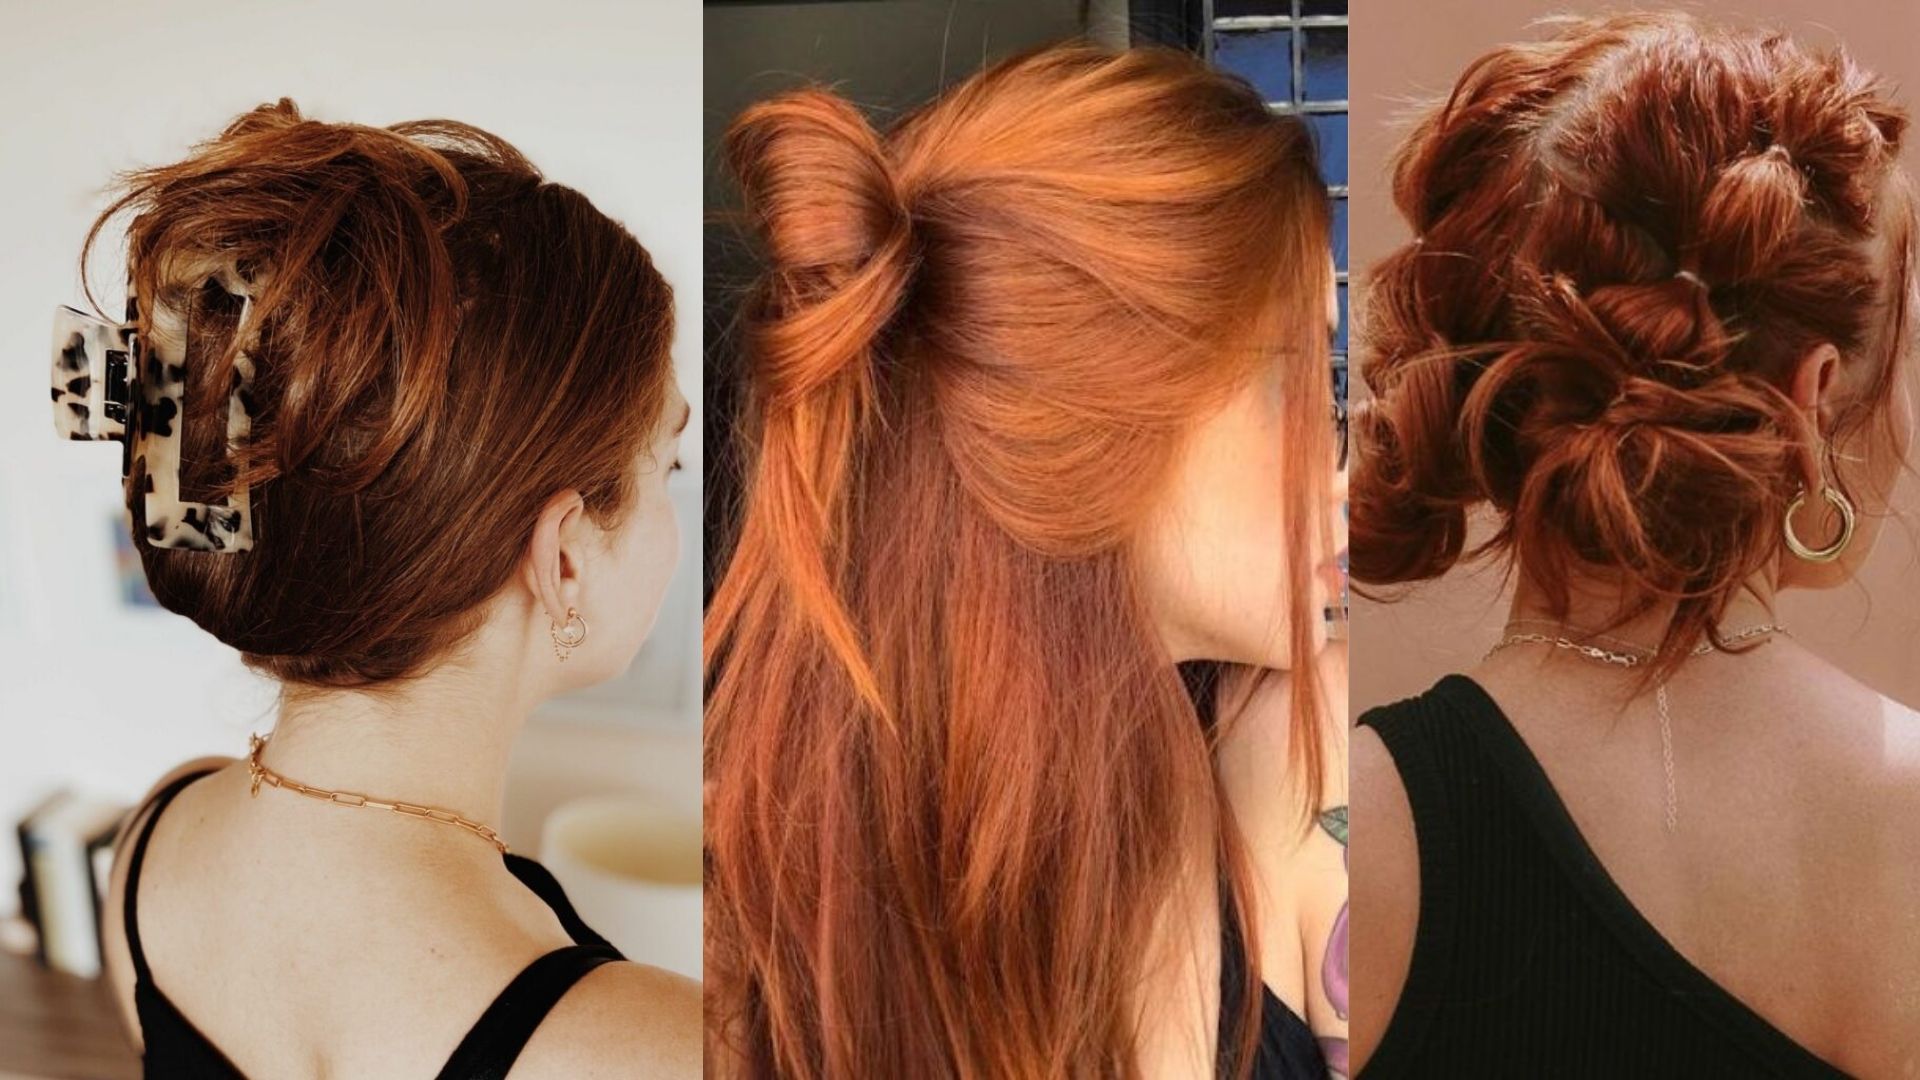 Five Easy Hairstyles With a Headband - A Beautiful Mess